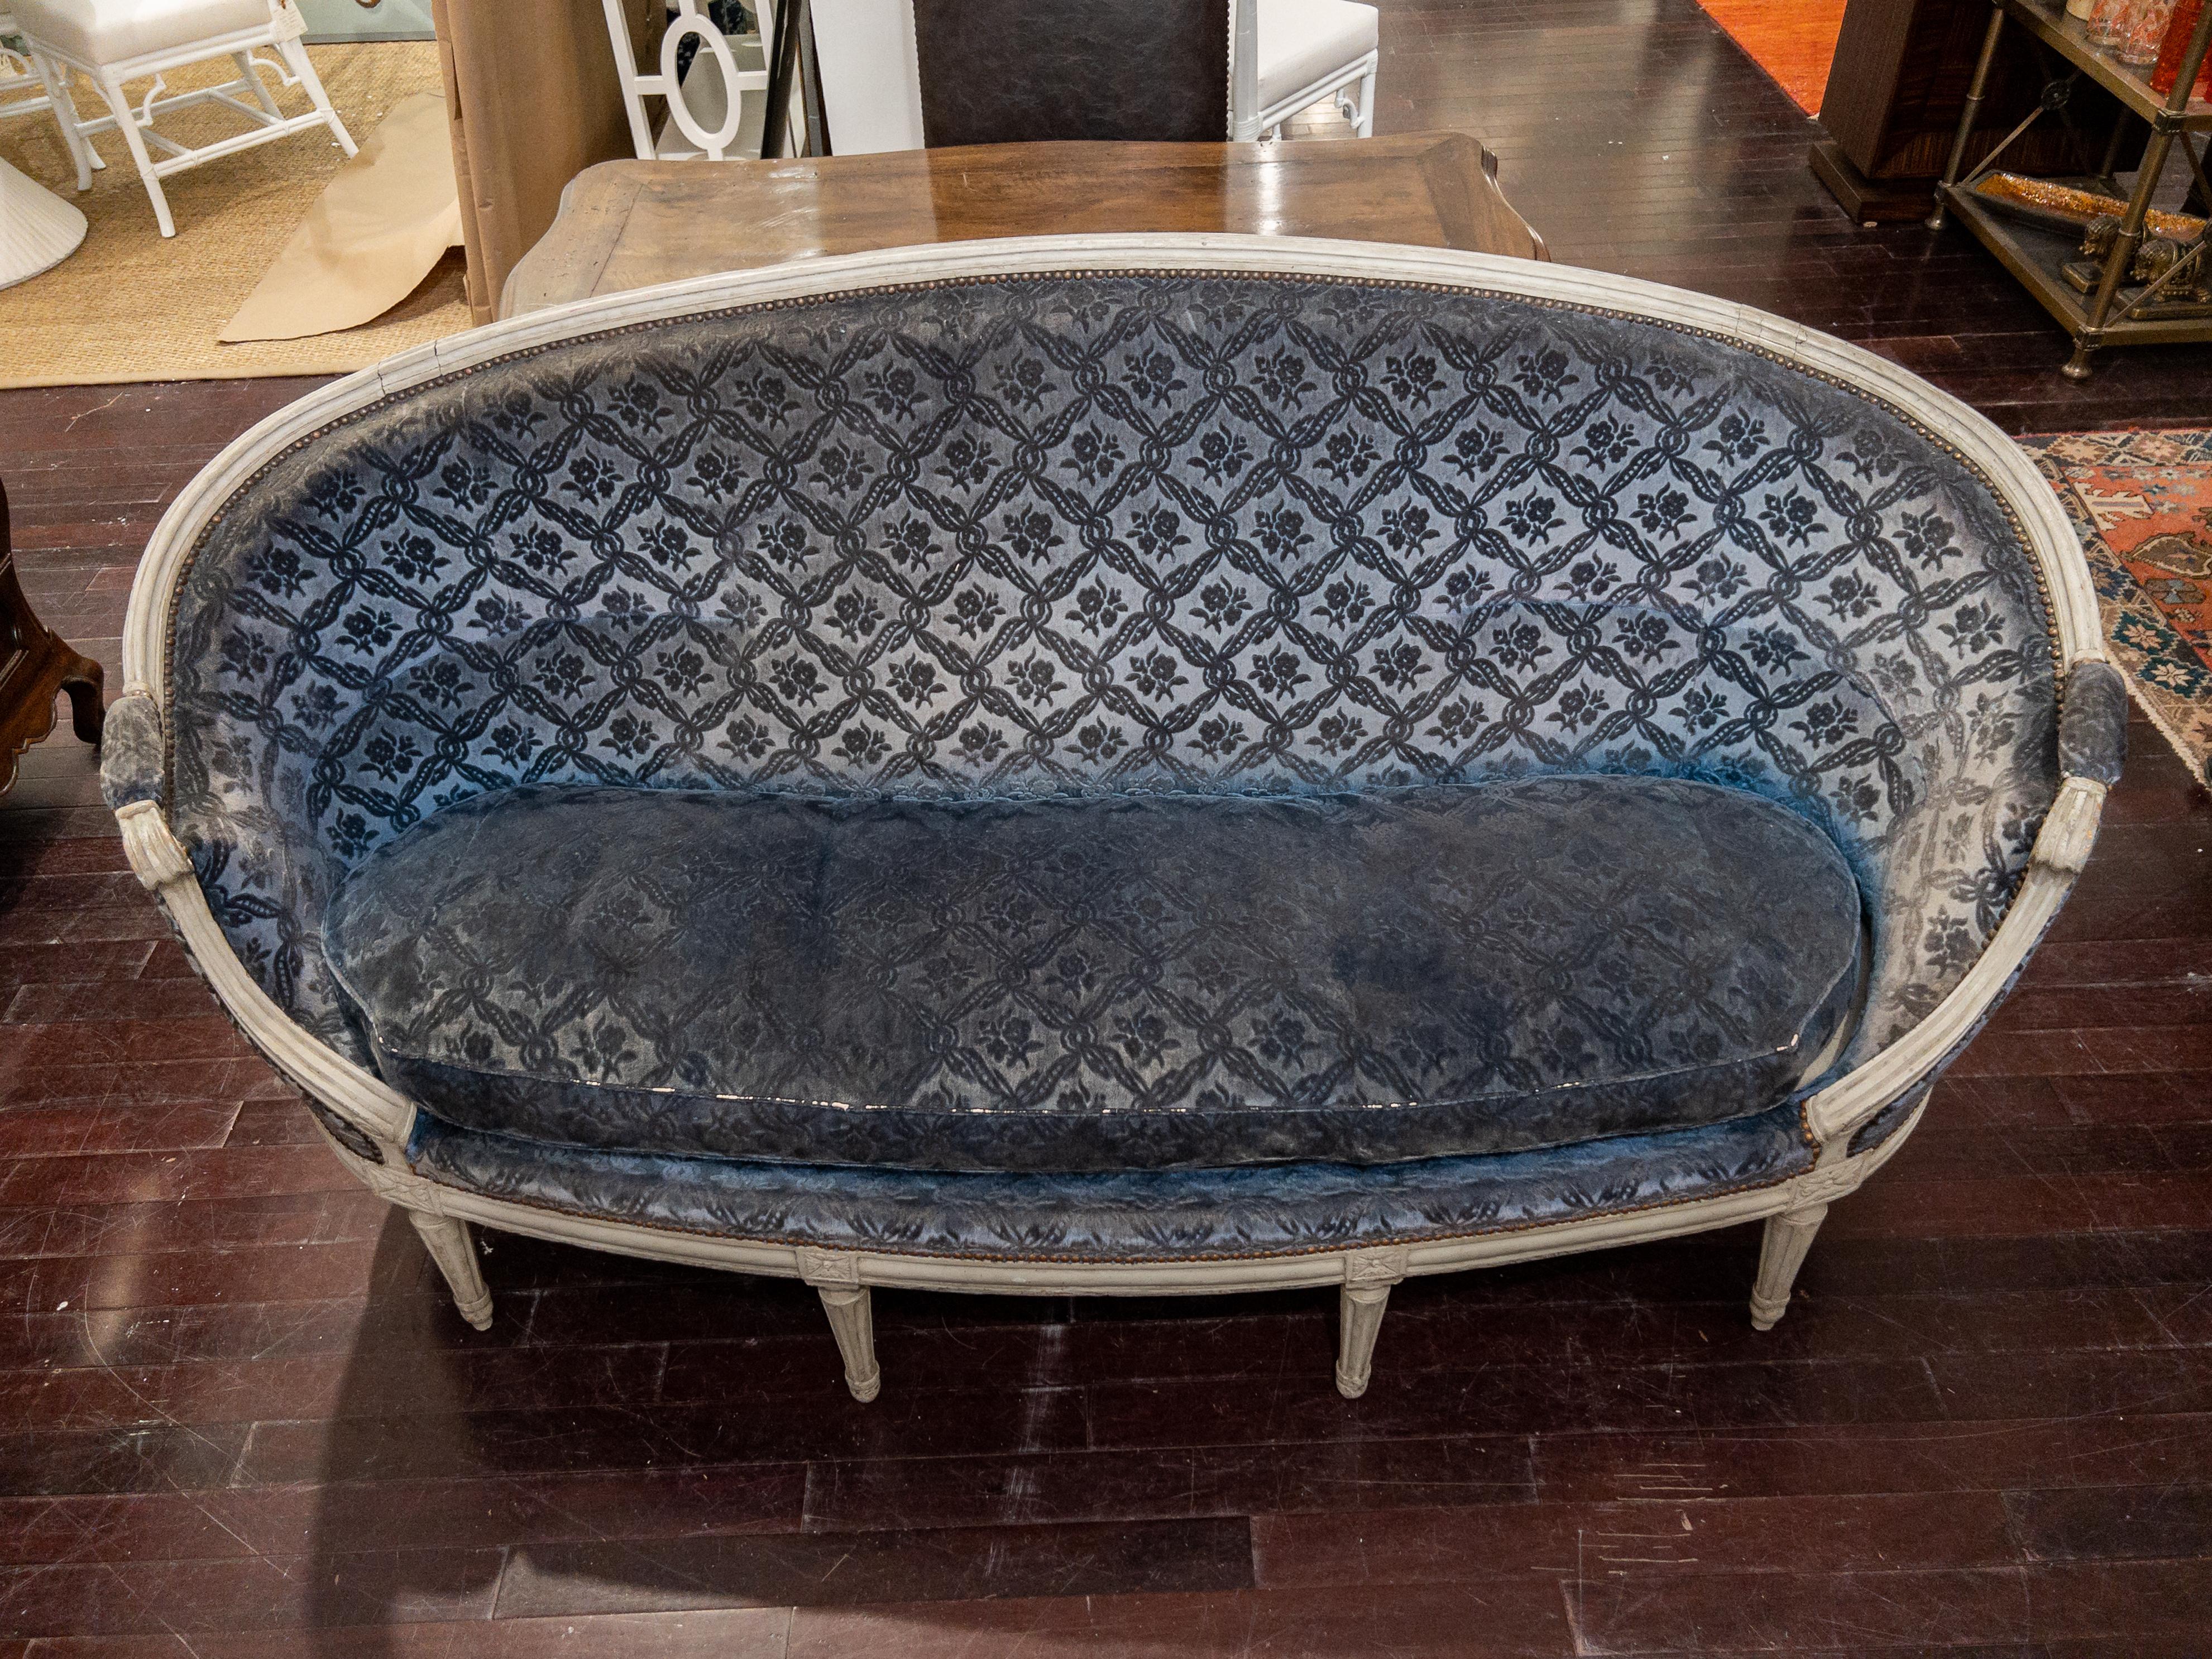 19th century French Settee, hand carved and Painted Louis XVI Style

This stunning blue settee features an intricately hand carved frame, carved reeded legs, ovoid shape, and desirable authentic distress / weathered finish to the frame from use